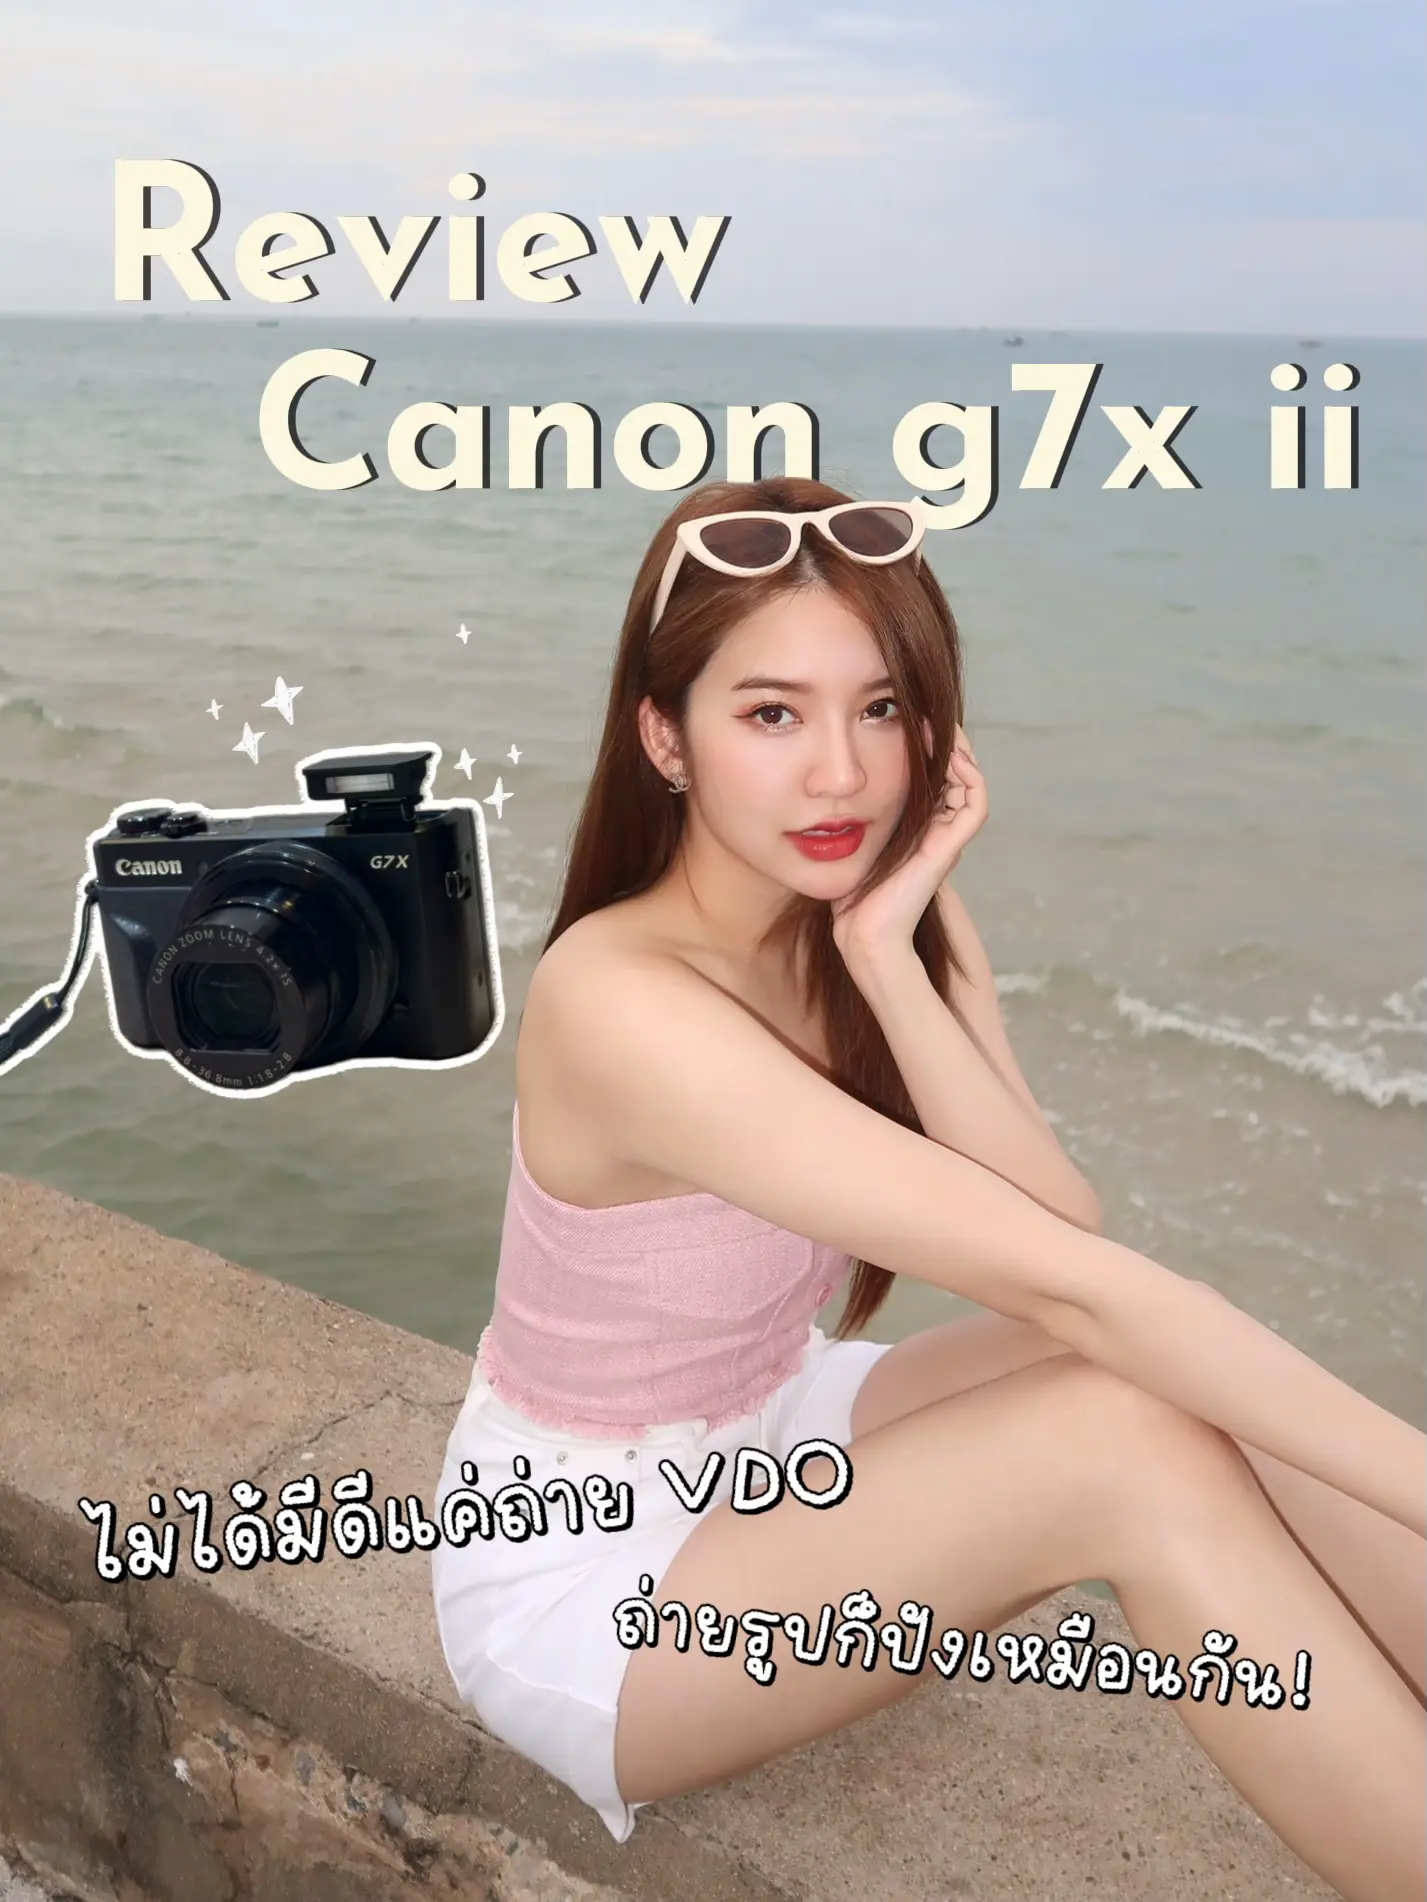 Review: On holiday with Canon's Powershot G7X Mark II